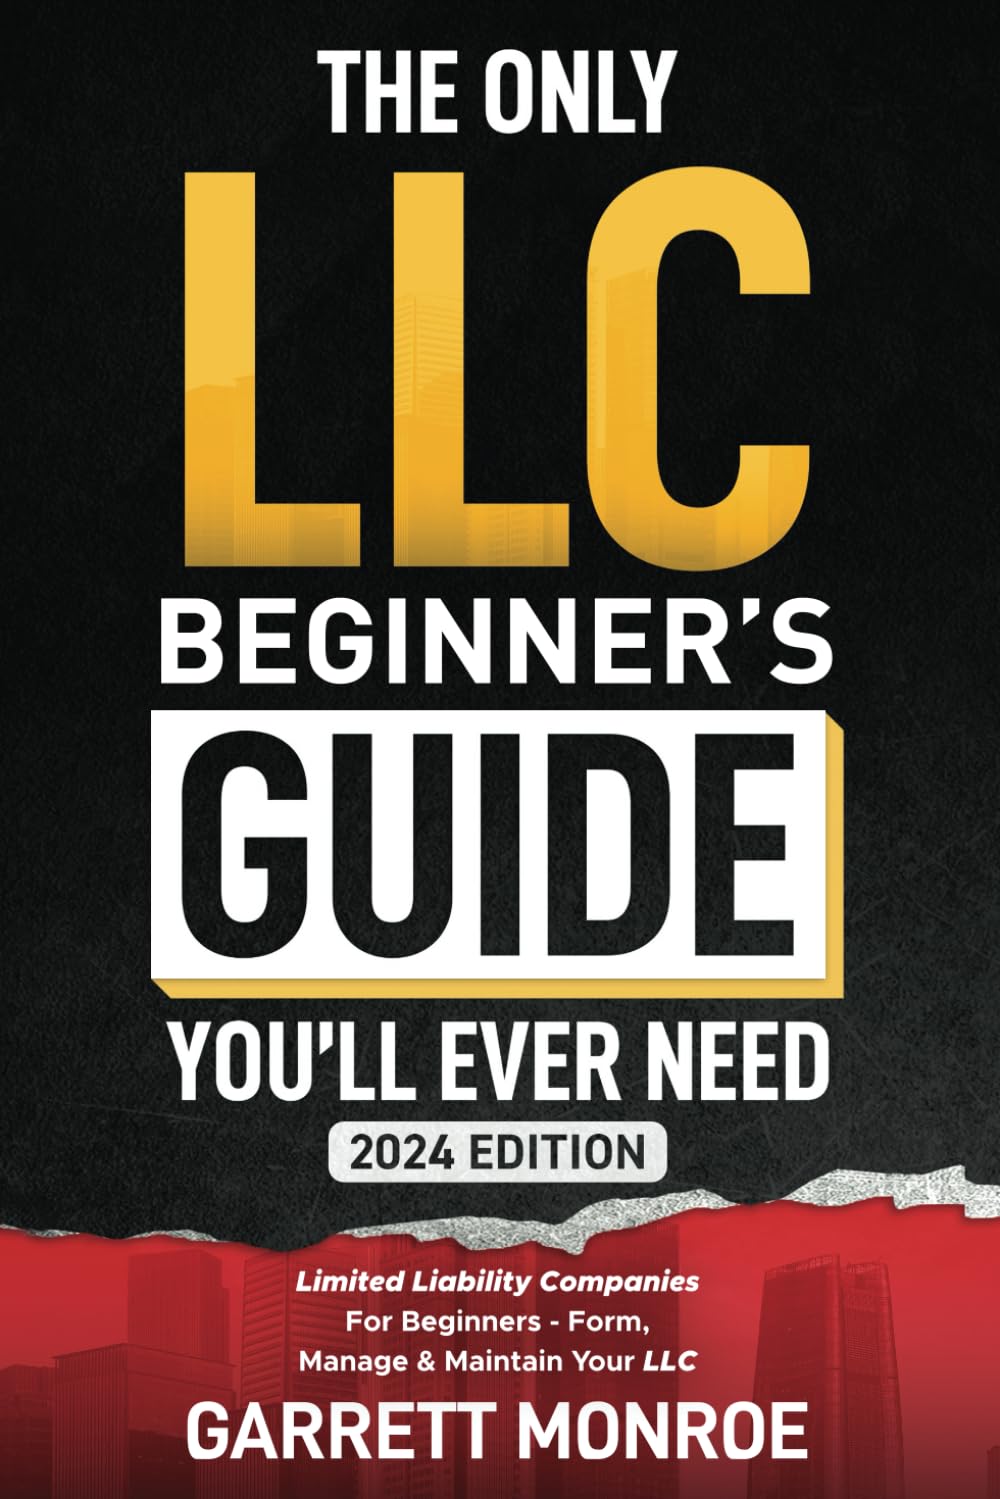 The Only LLC Beginners Guide You’ll Ever Need: Limited Liability Companies For Beginners - Form, Manage & Maintain Your LLC (Starting a Business Book) (How to Start a Business)